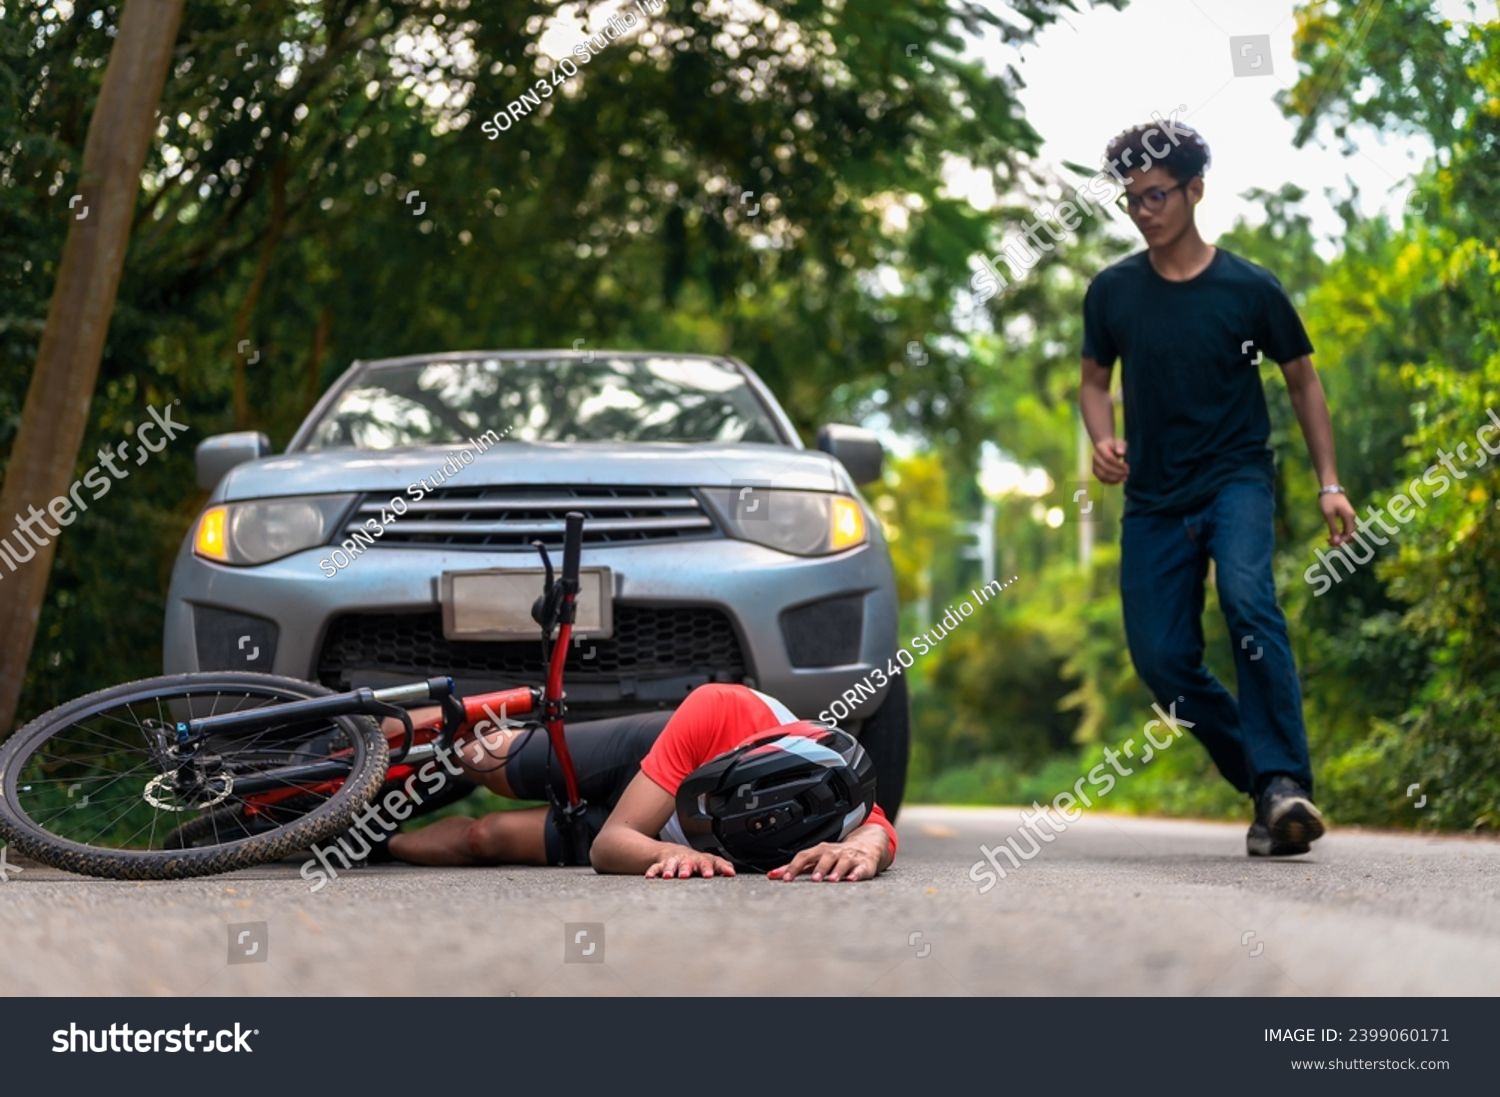 Young Asian man driving a car crashes into a cyclist falls and injures, Cyclist in need of urgent aid, Unexpected Roadside Encounter and Immediate Assistance for Outdoor Mishaps Car Crash. #2399060171